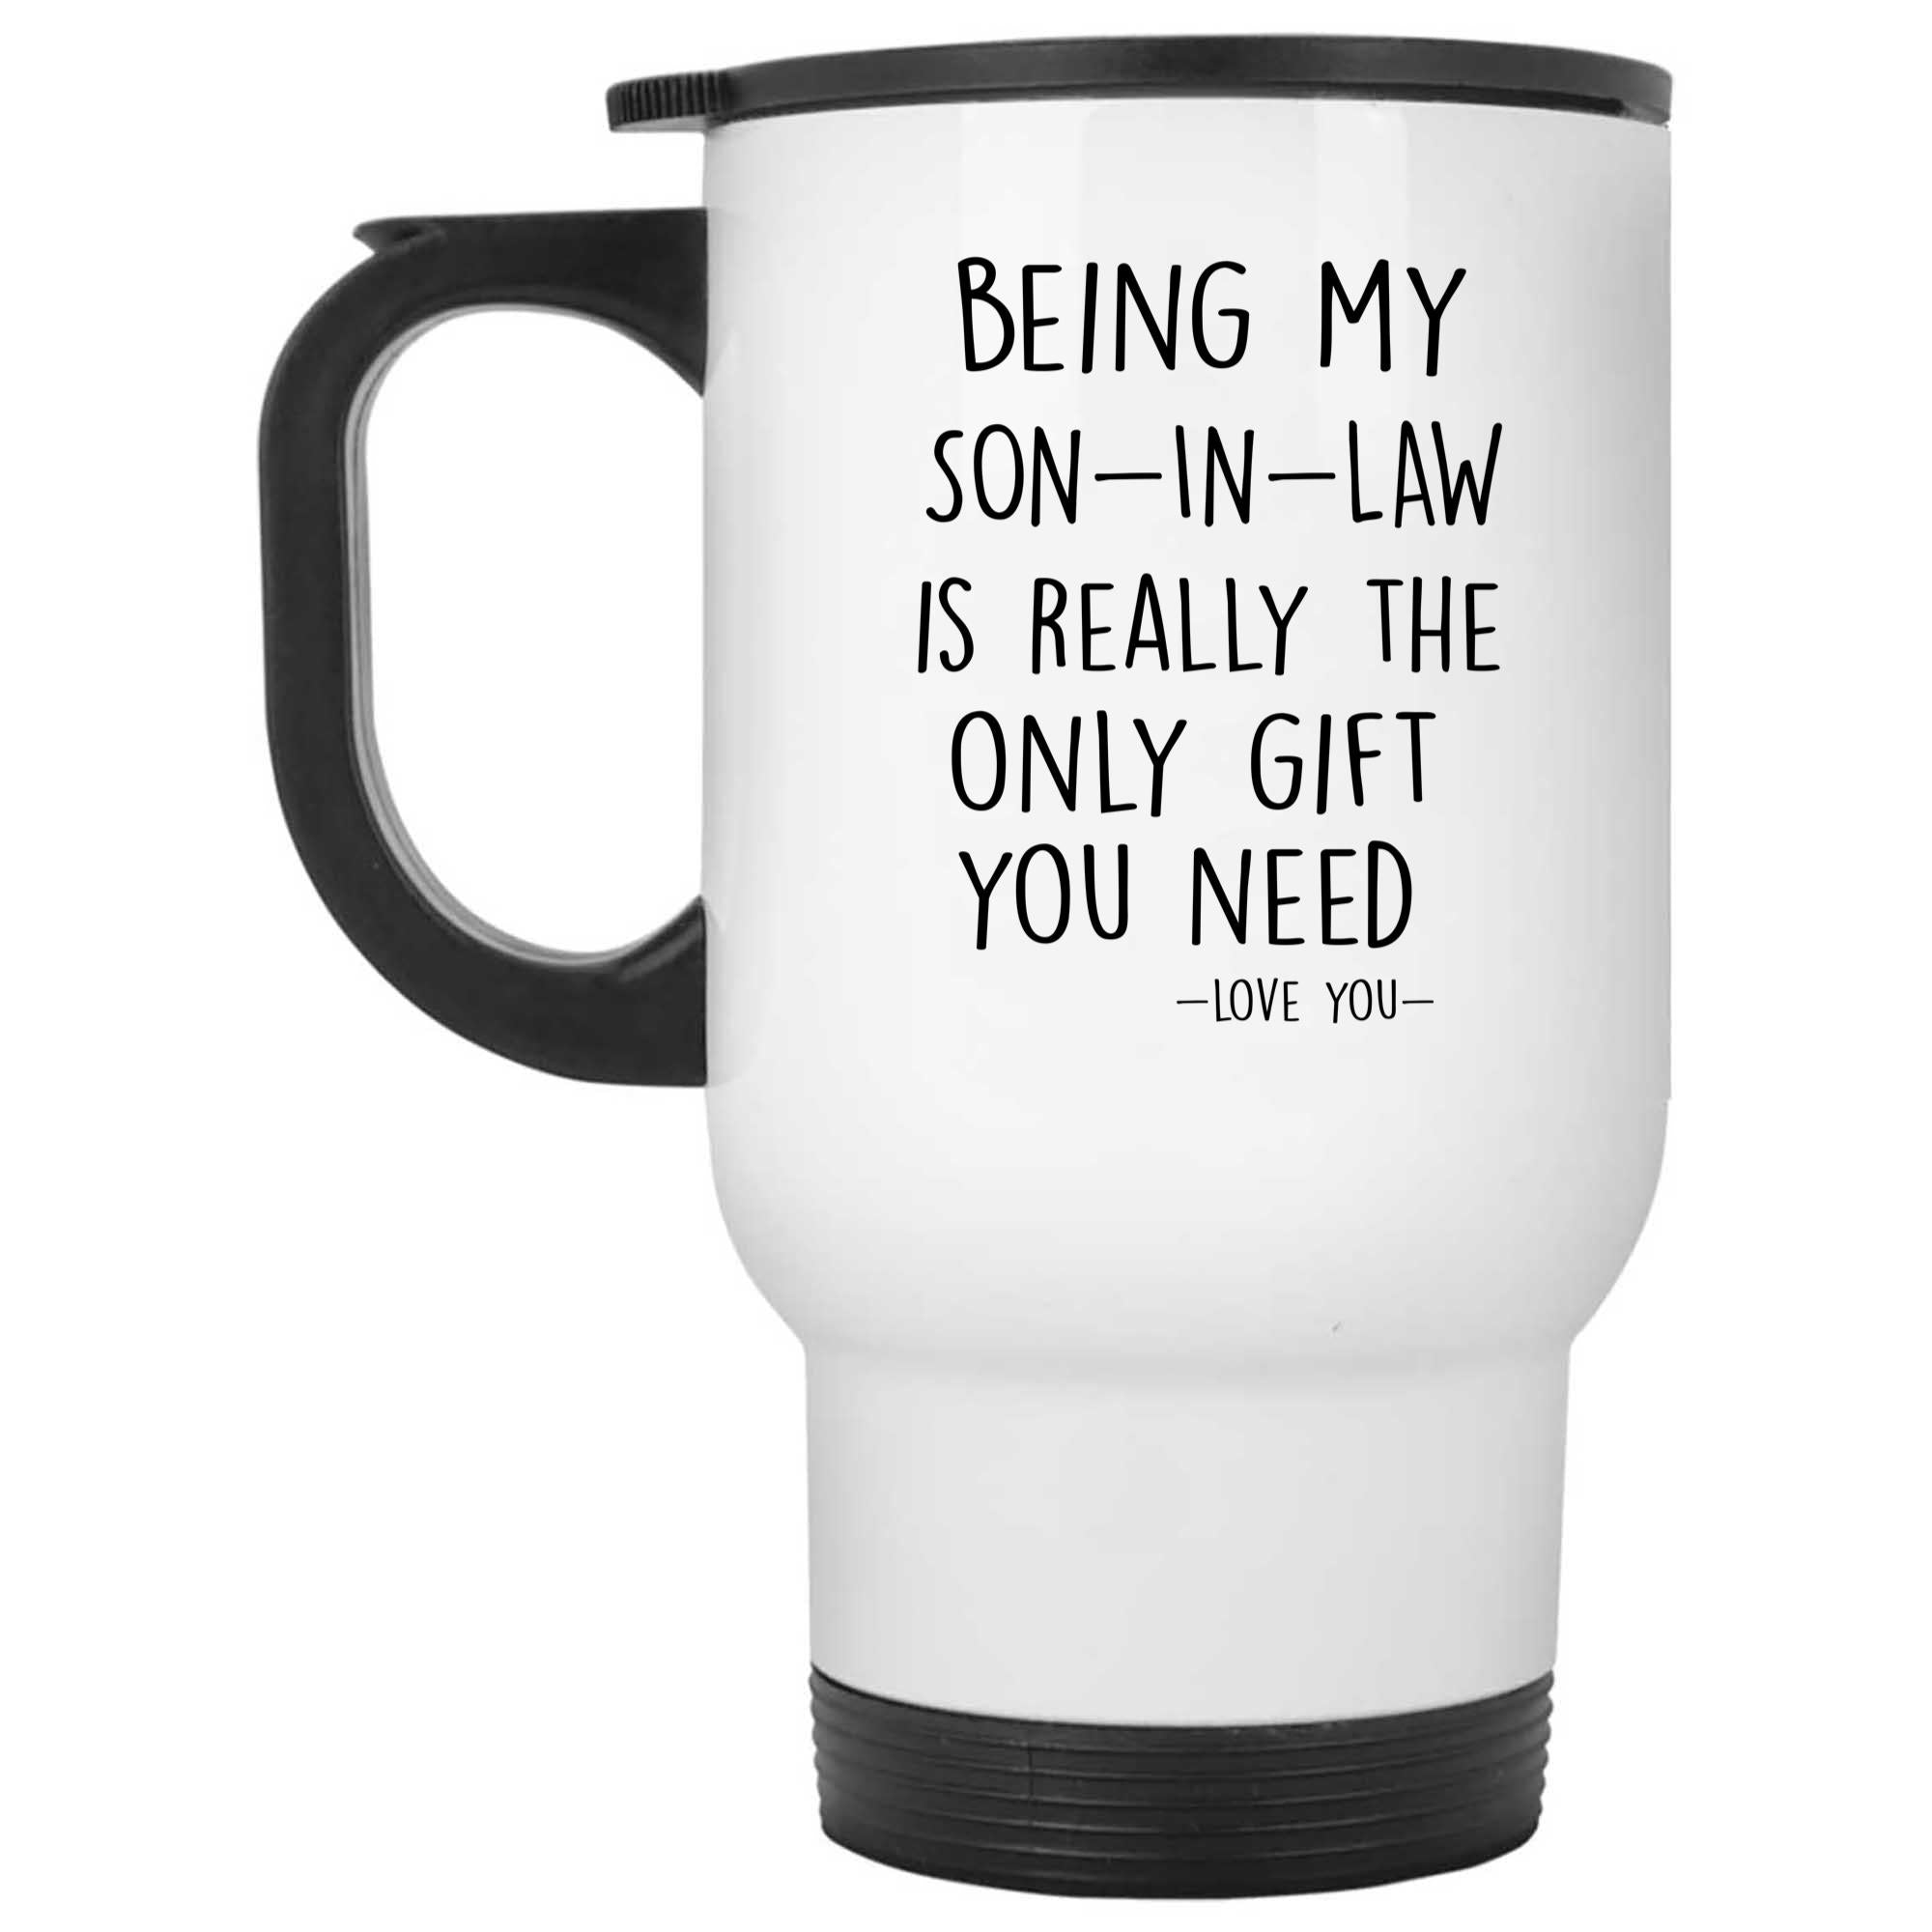 Skitongifts Funny Ceramic Novelty Coffee Mug Being My Soninlaw Is Really The Only You Need  Love You Soninlaw Funny For Father's Day XHadZt0